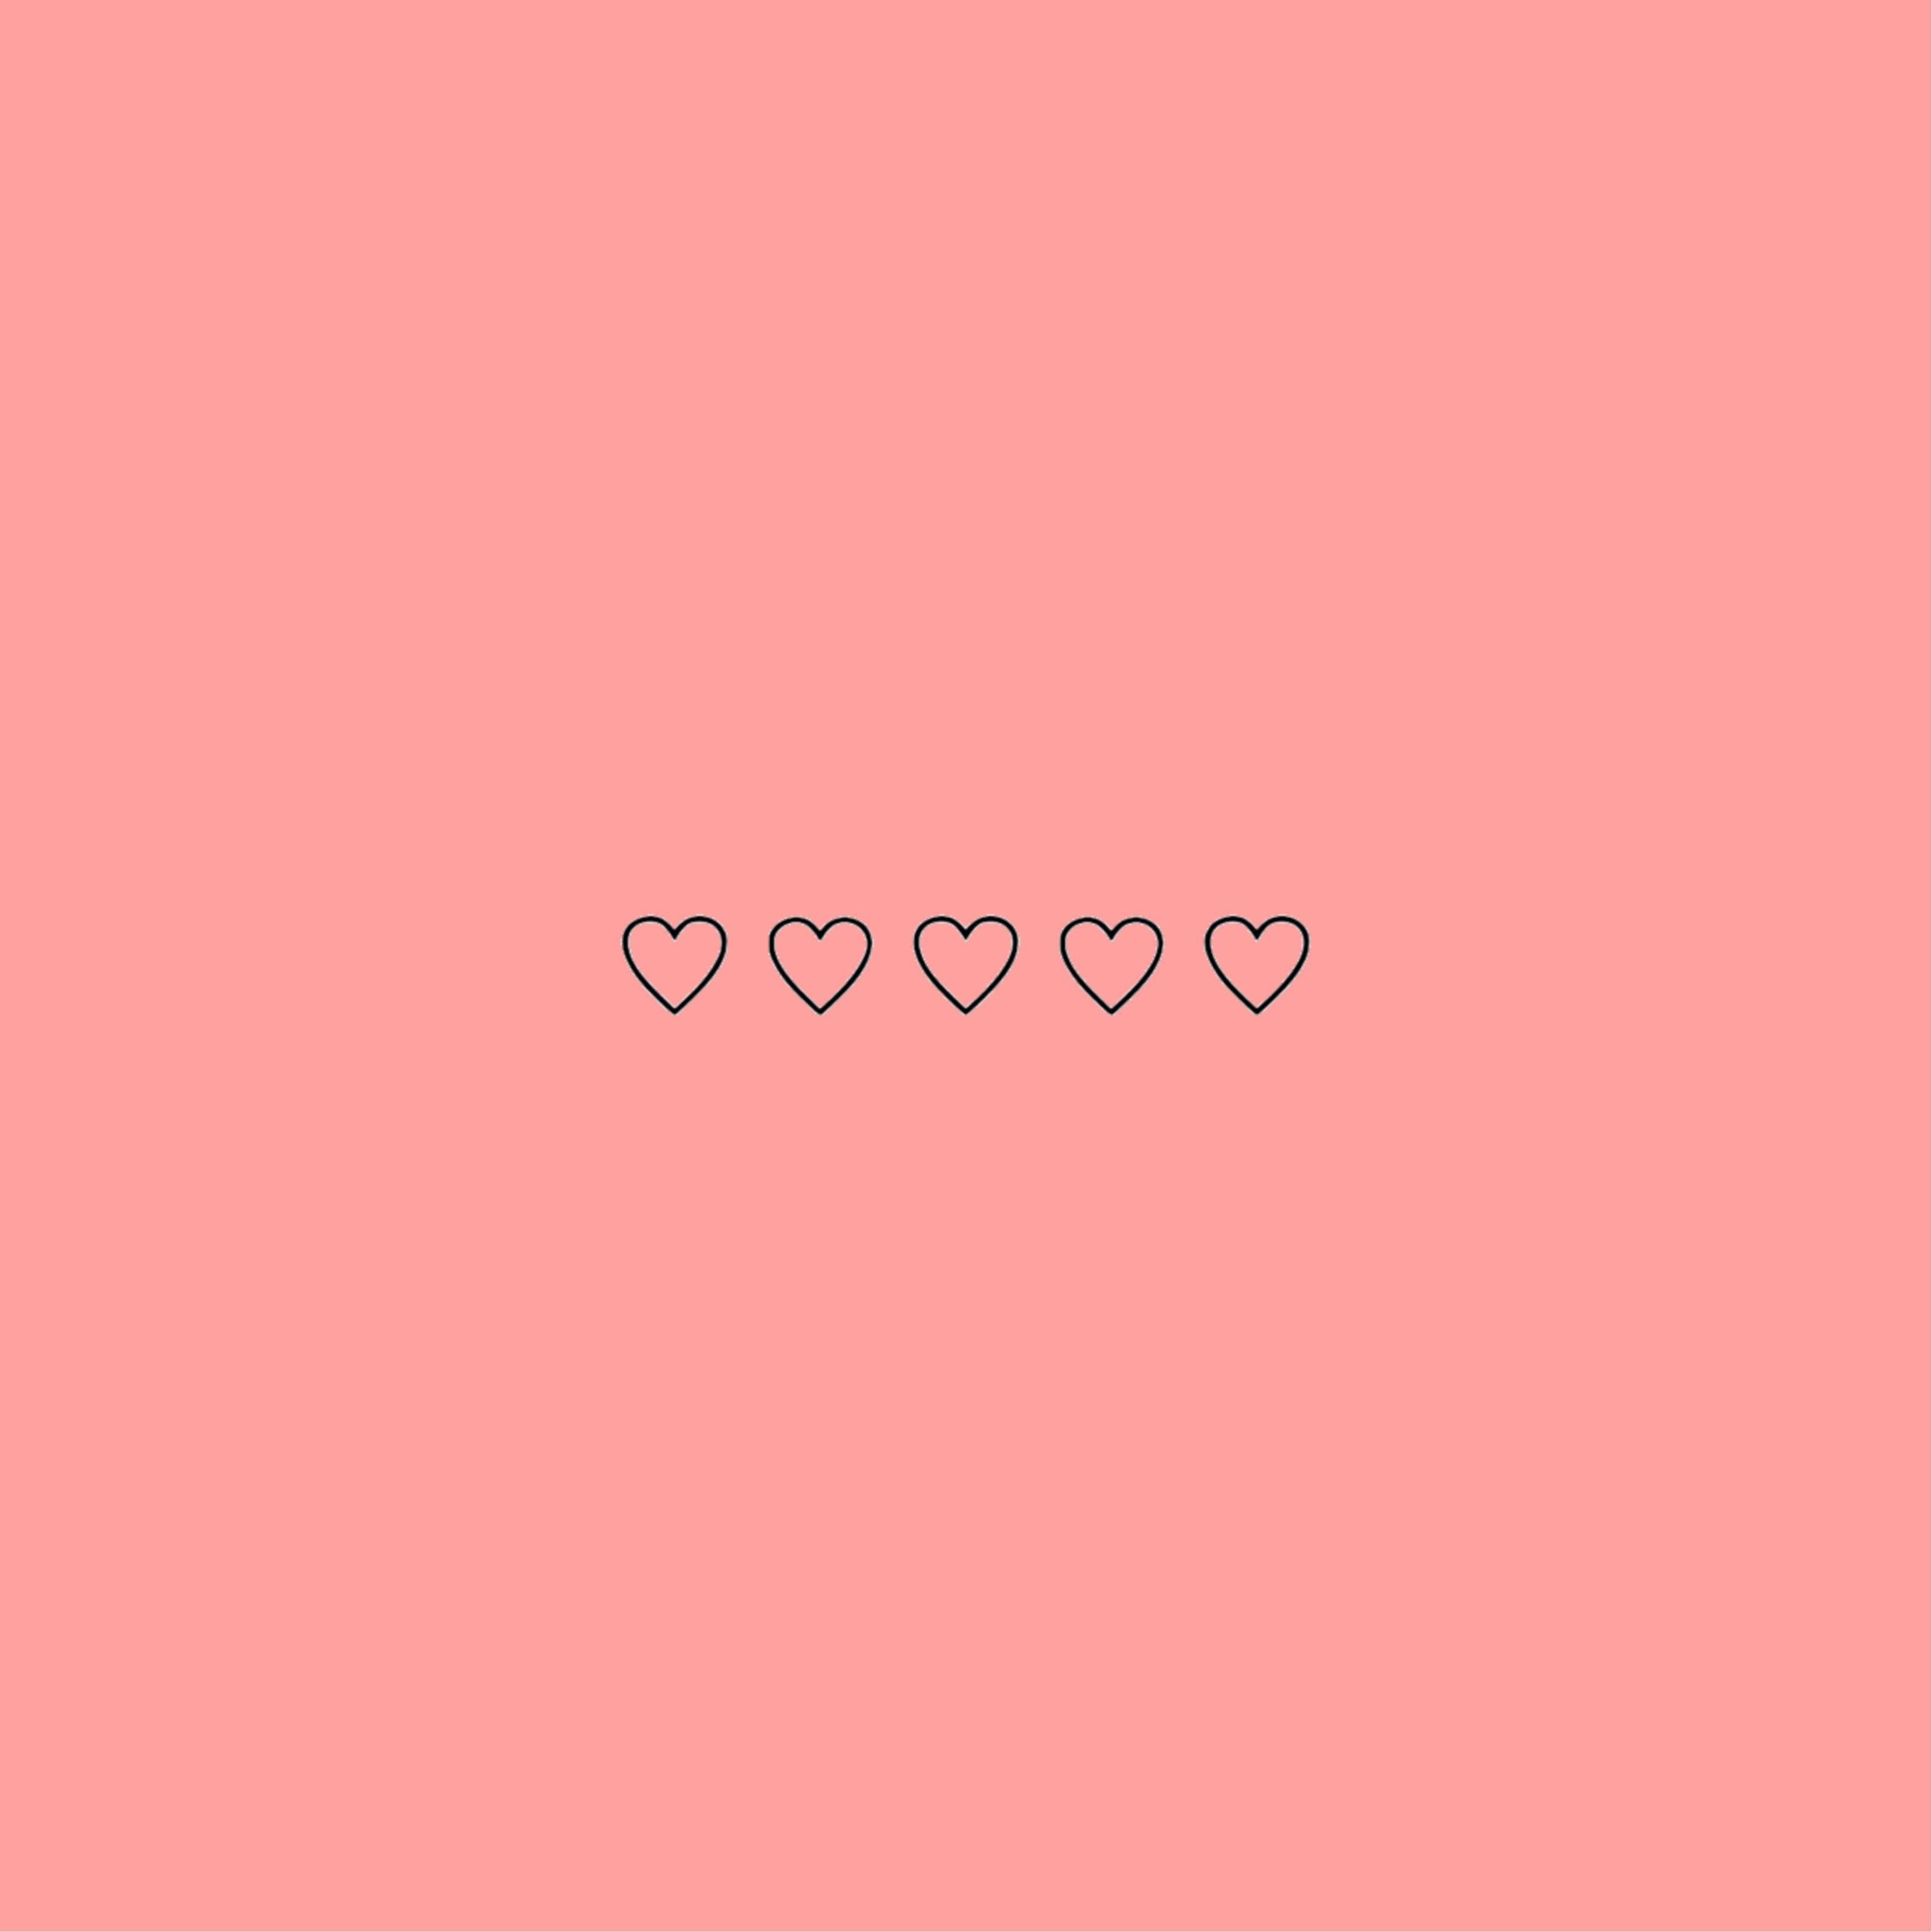 Aesthetic phone background with four hearts on a pink background - Peach, iPad